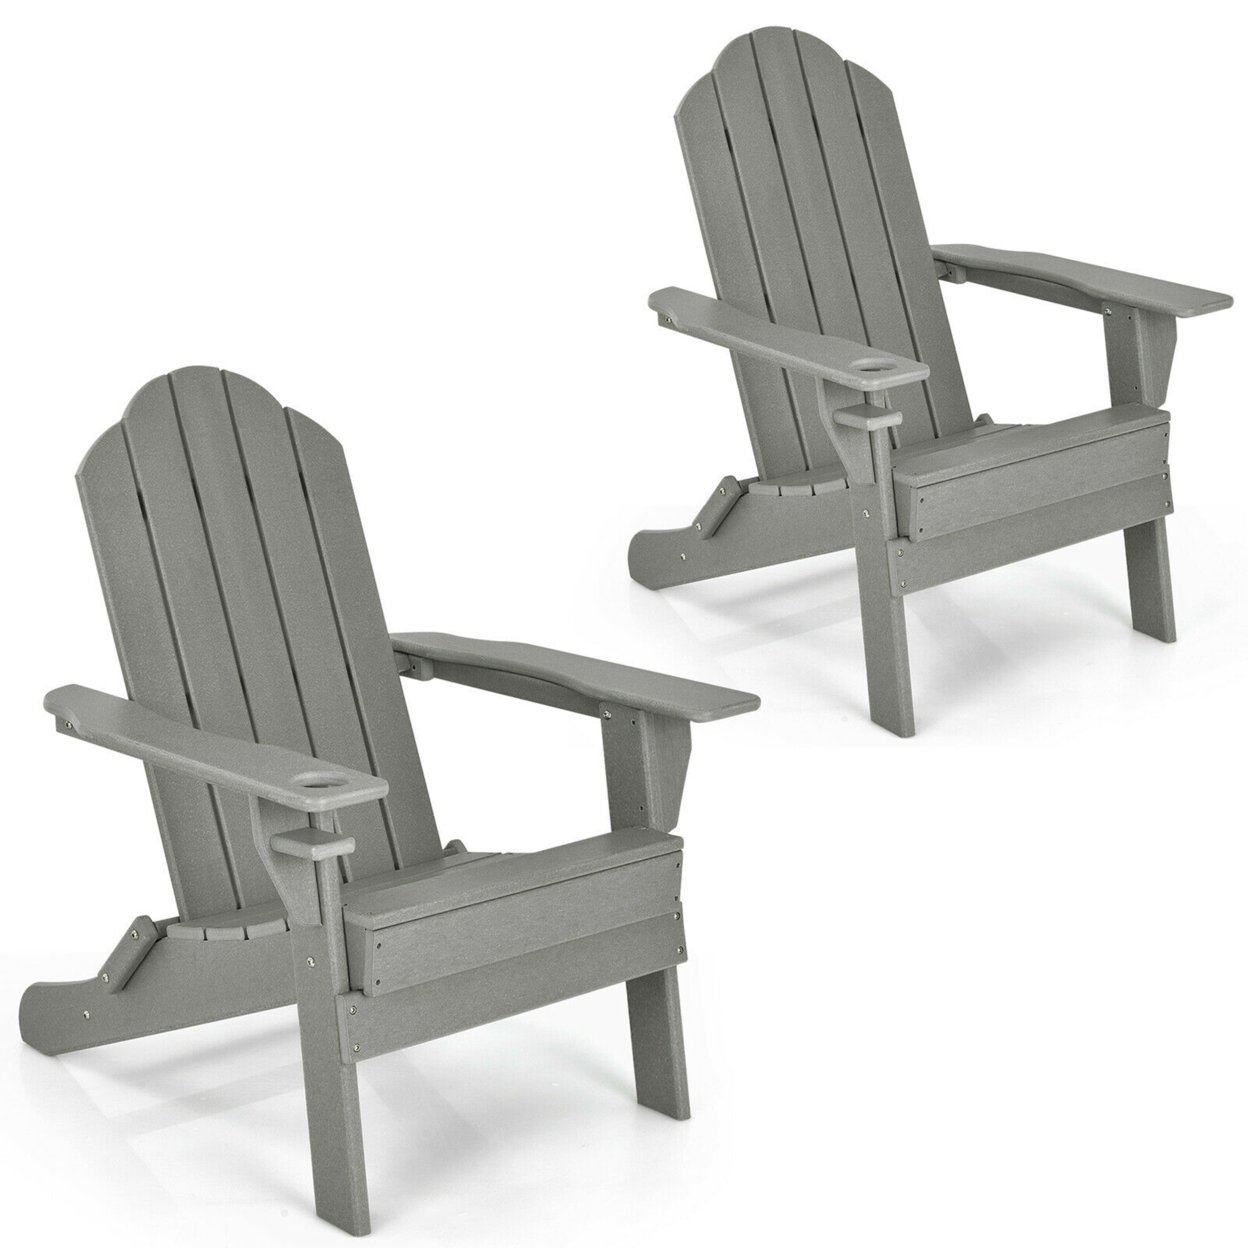 2PCS Patio Folding Adirondack Chair Weather Resistant Cup Holder Yard - Grey